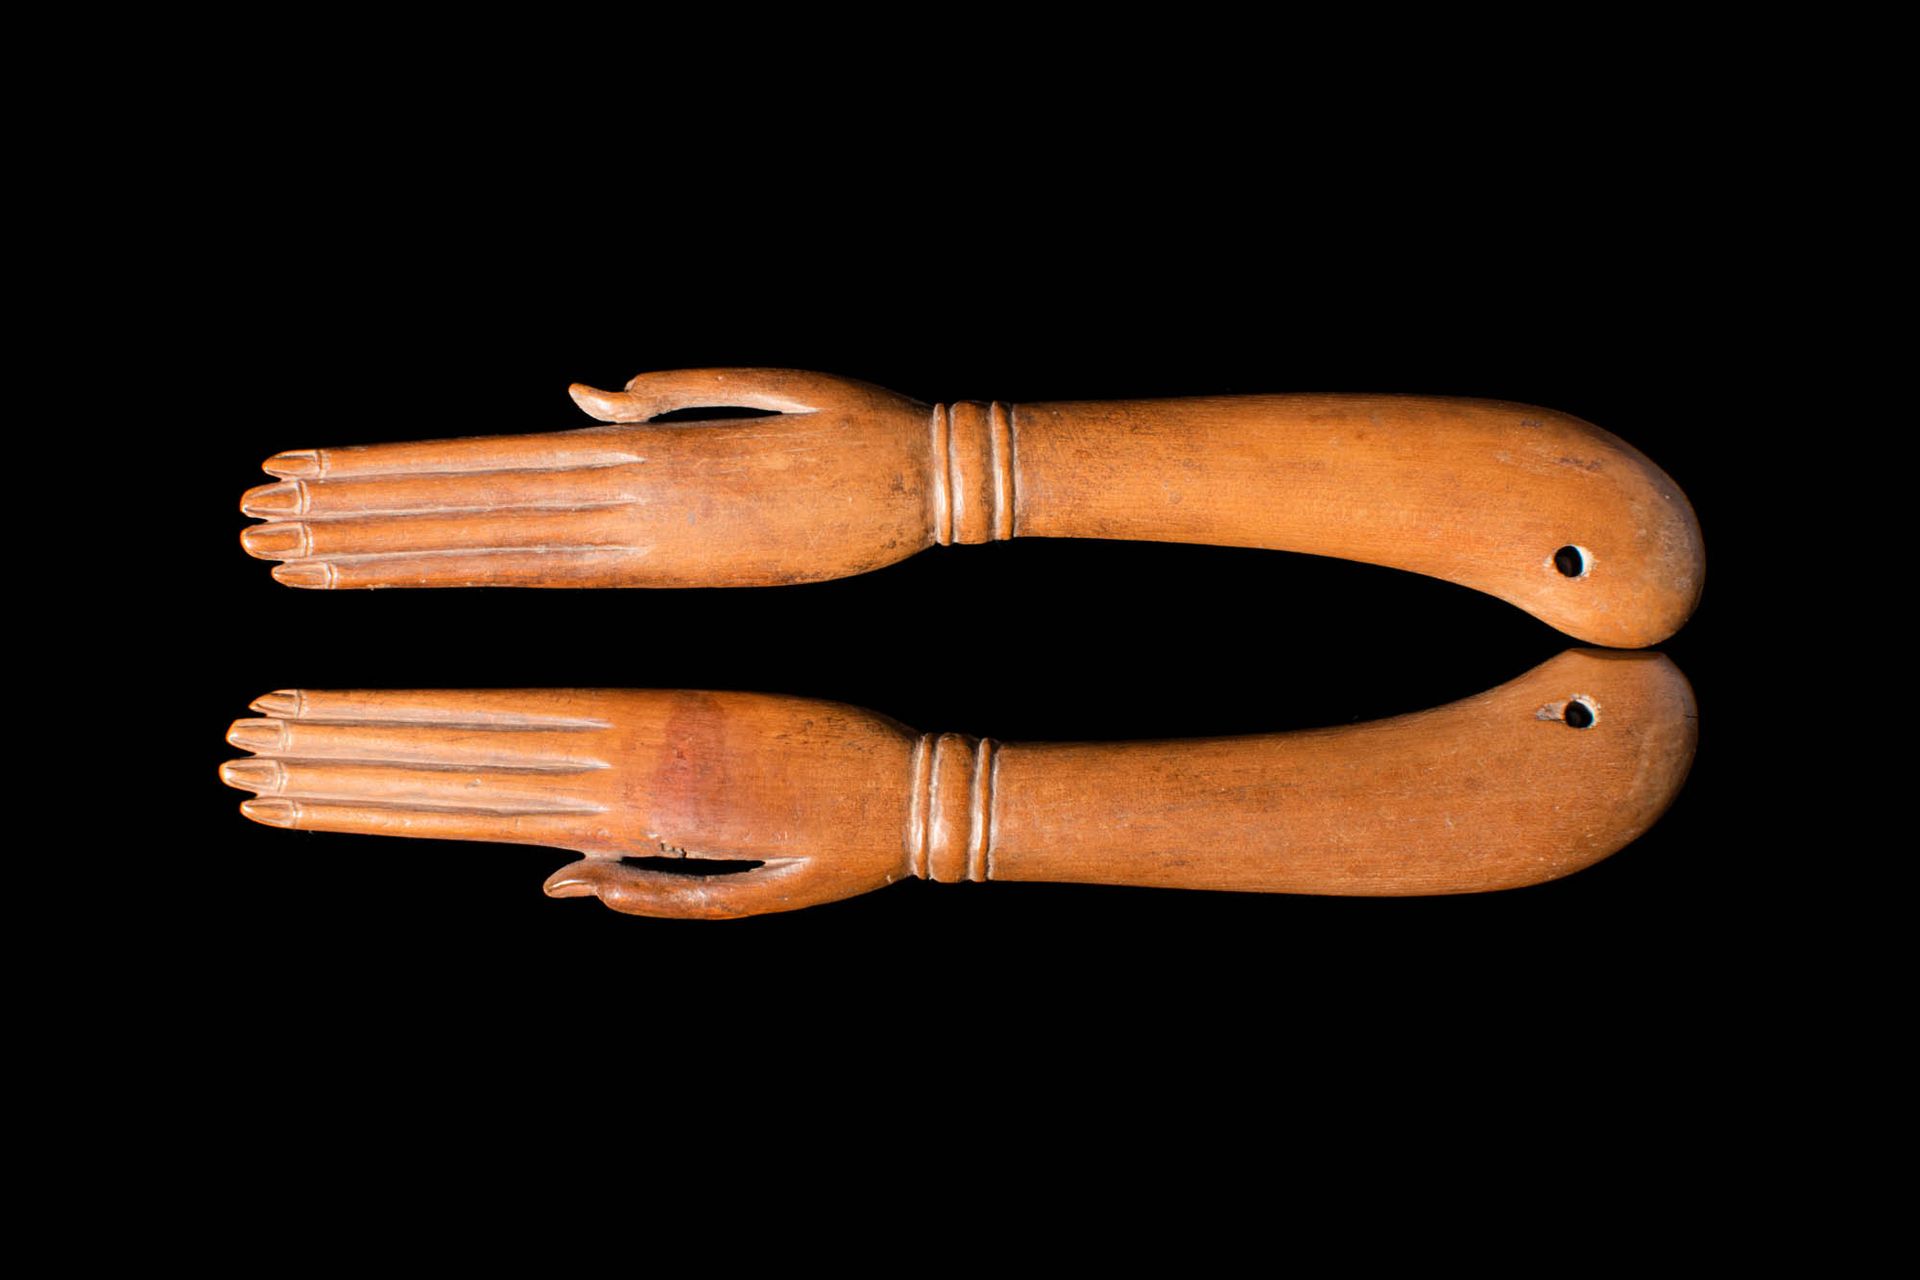 EGYPTIAN WOODEN CLAPPERS HANDS SHAPED Neues Reich, ca. 1550 - 1069 V. CHR.
Ein a&hellip;